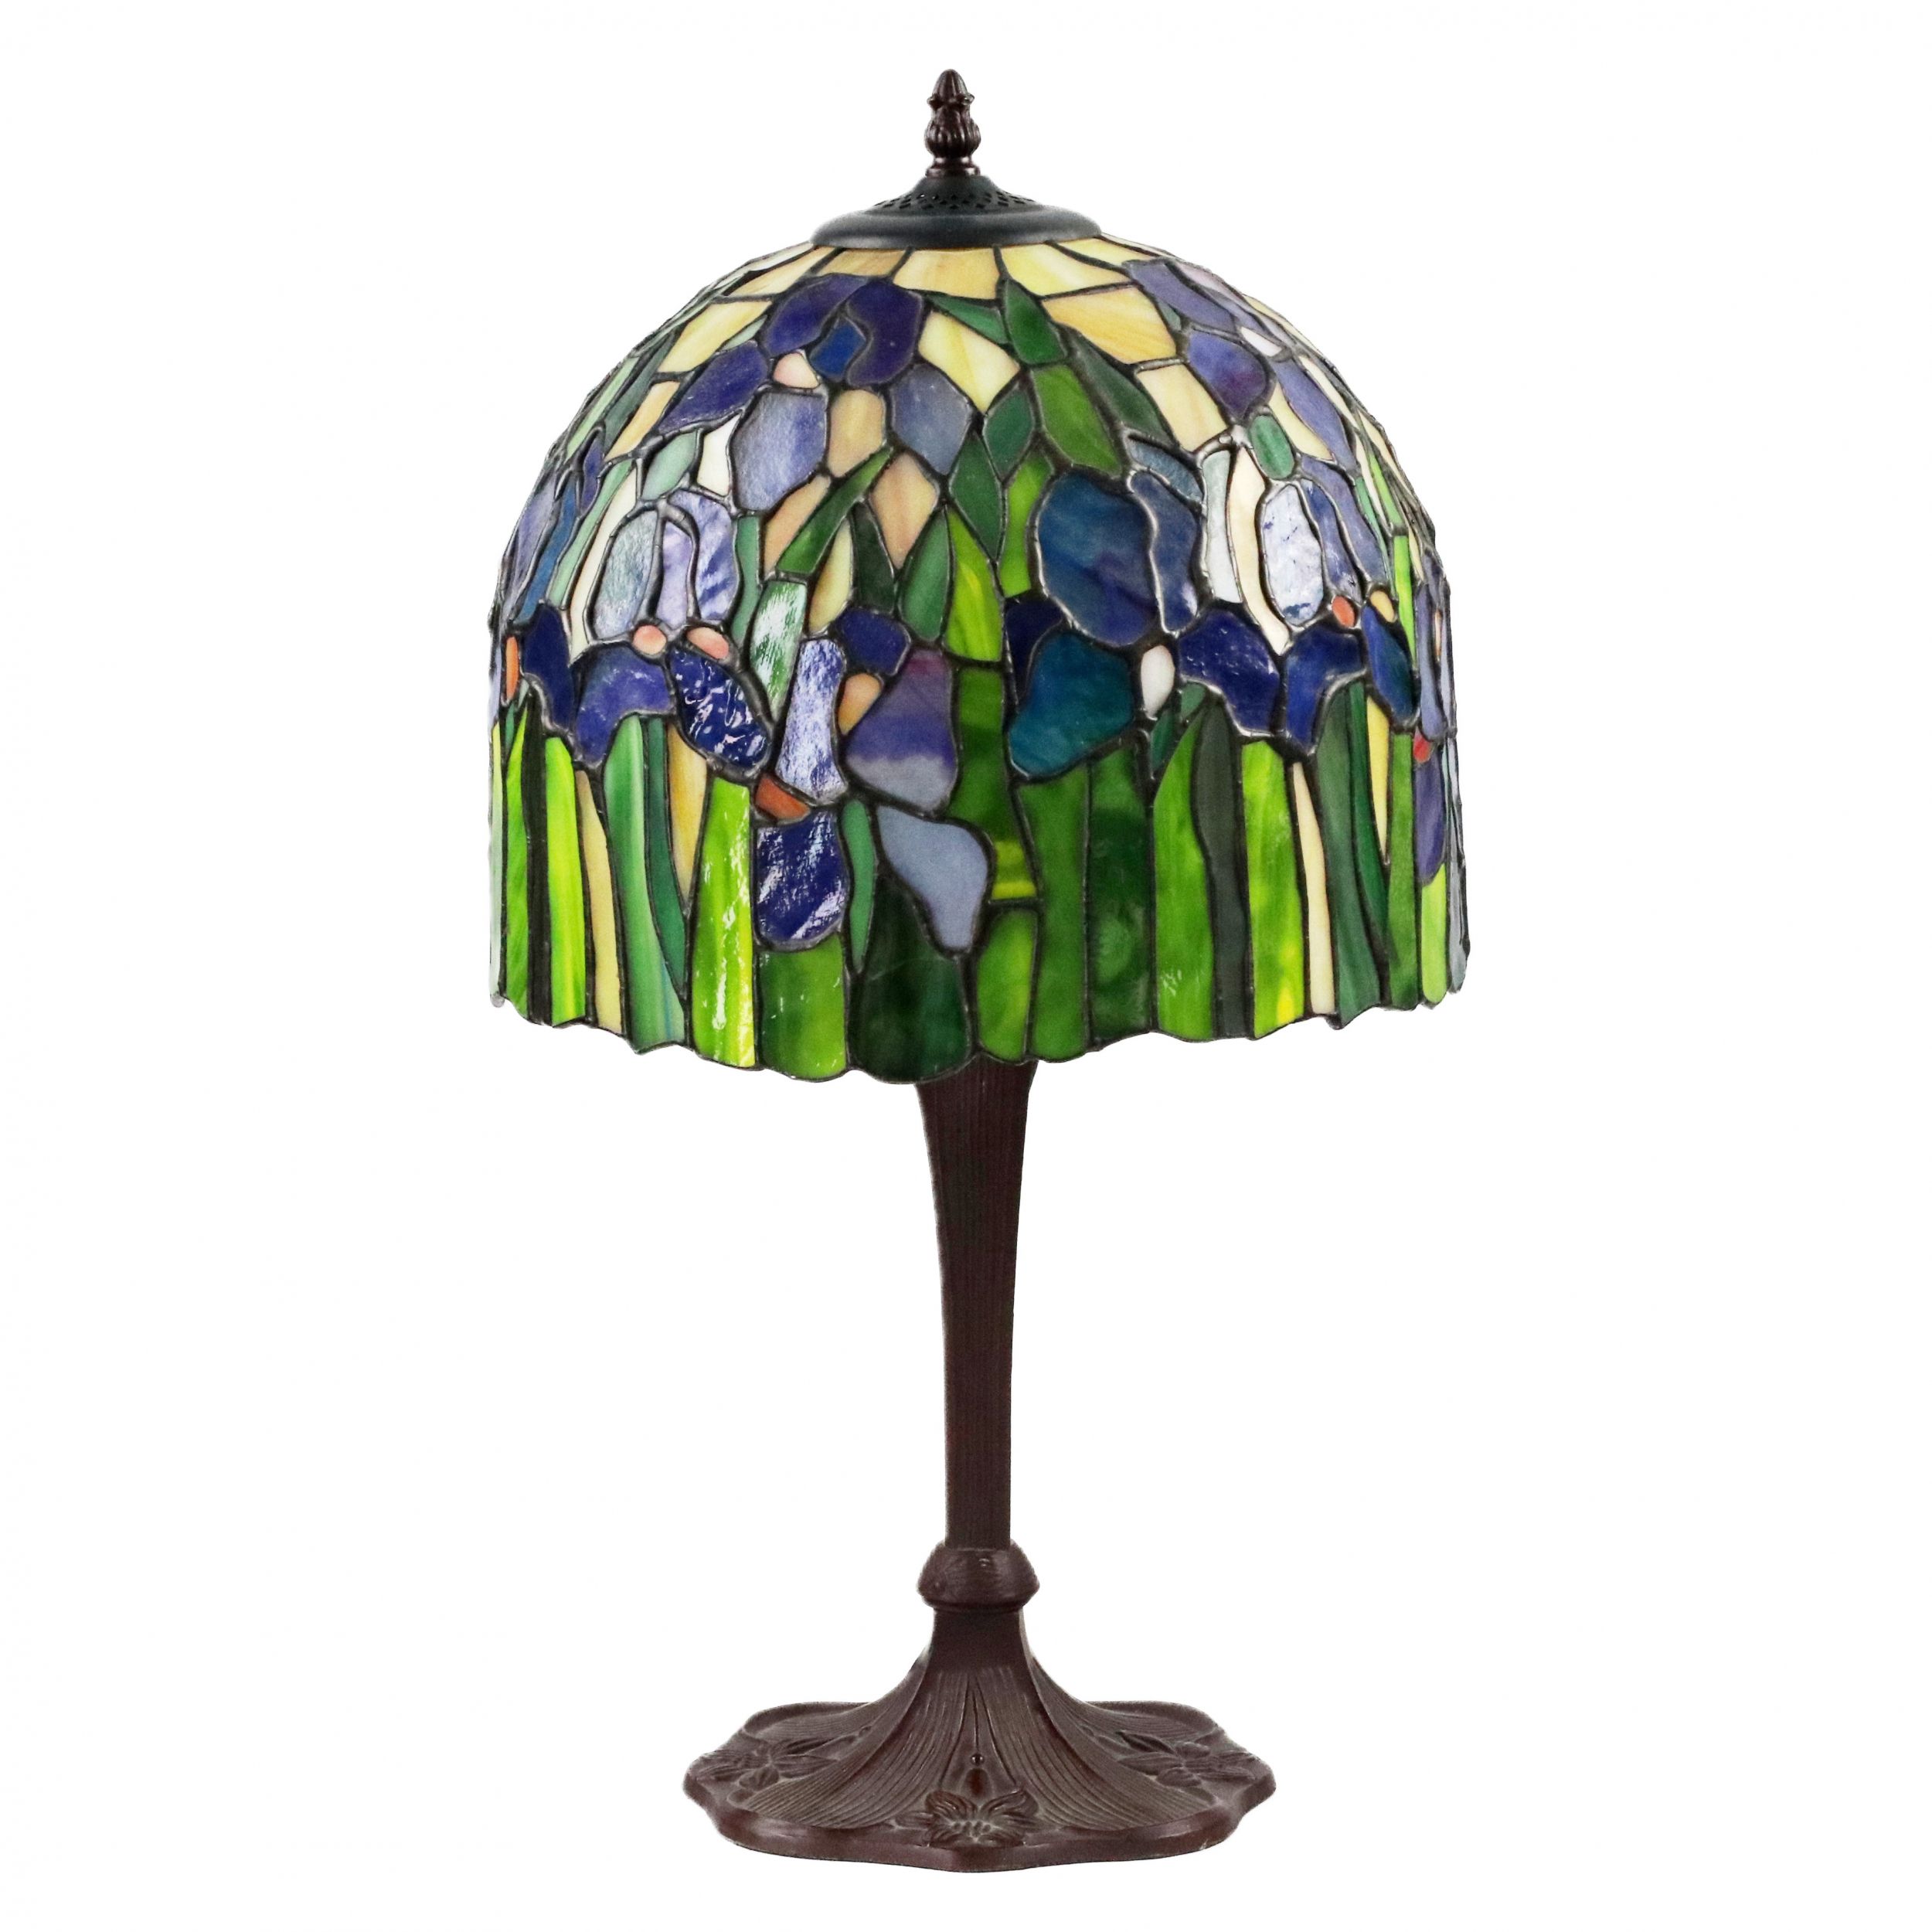 Tiffany-style-stained-glass-lamp-20th-century-